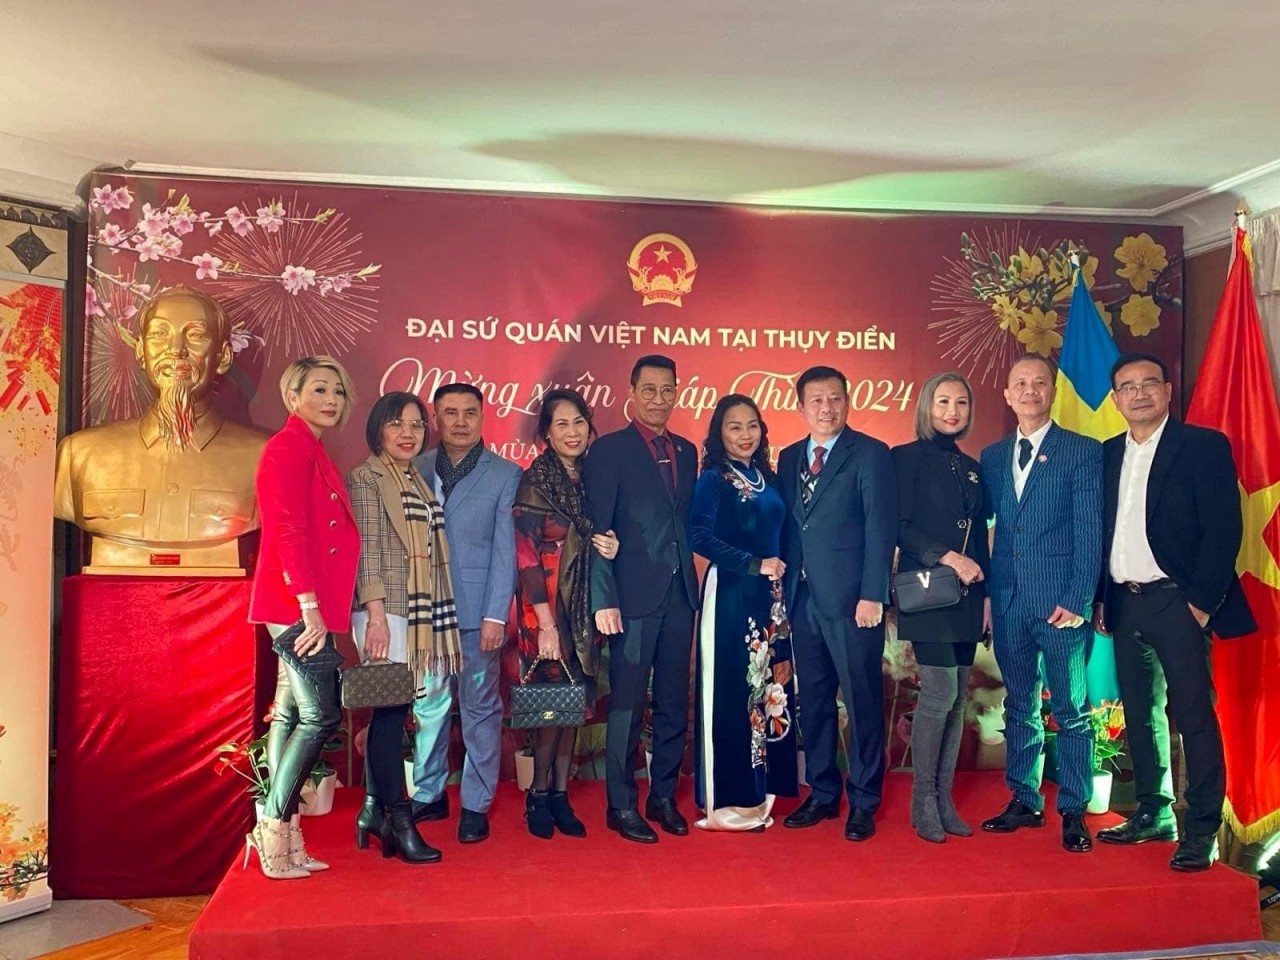 About 200 OVs in Sweden, Latvia Celebrate Lunar New Year Event